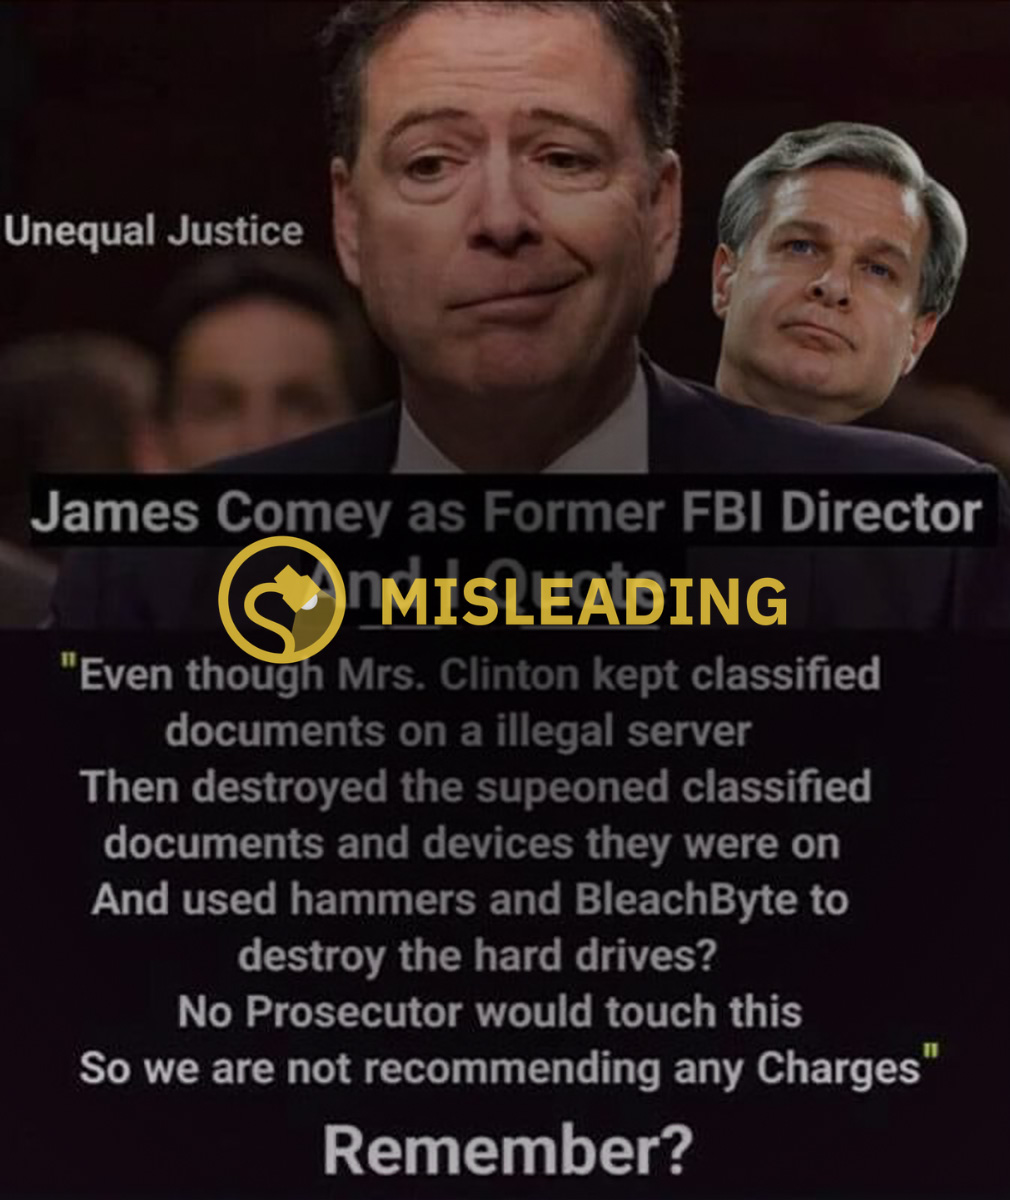 A meme titled unequal justice included a quote supposedly from James Comey about Hillary Clinton's handling of classified information on private email servers.